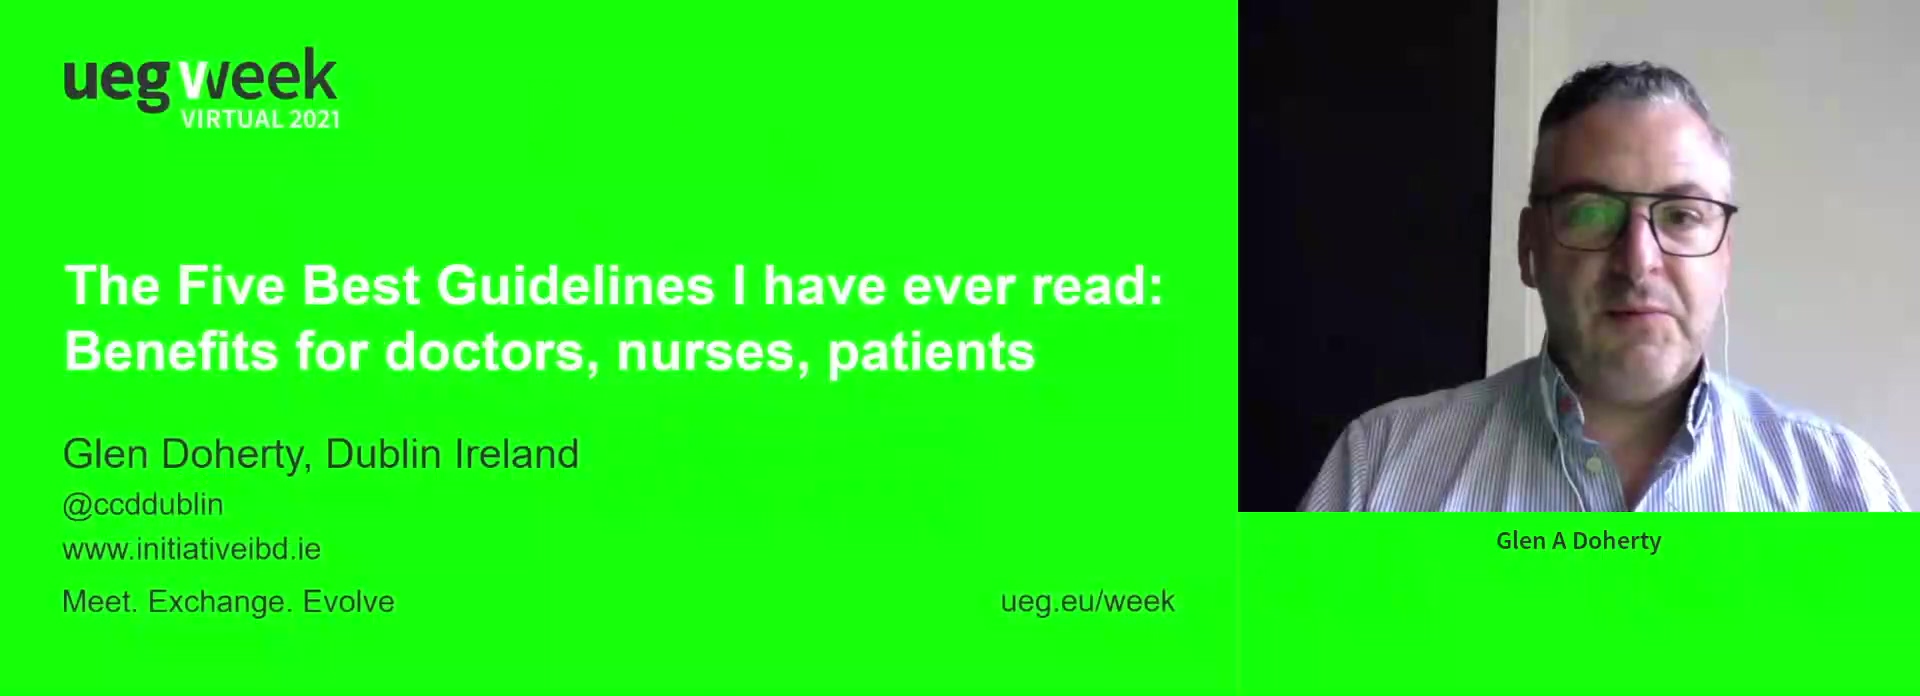 Extracts from the 5 best guidelines I have ever read: Benefits for doctors, nurses & patients